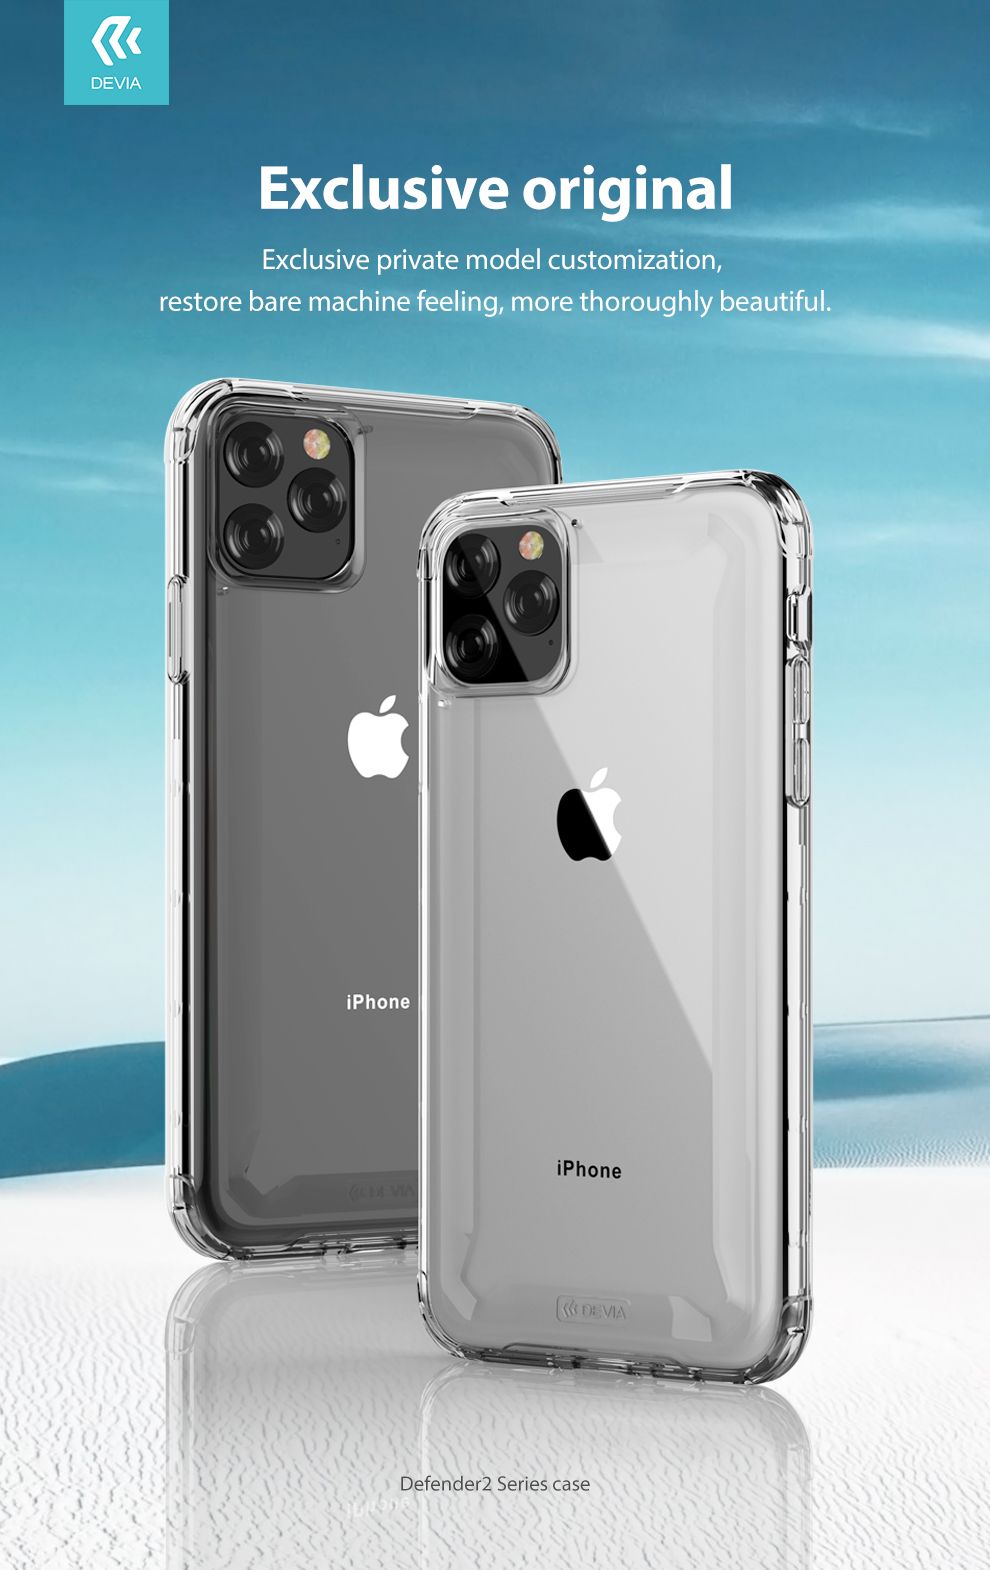 Devia Defender 2 Series Case for iPhone 11, iPhone 11 Pro Max